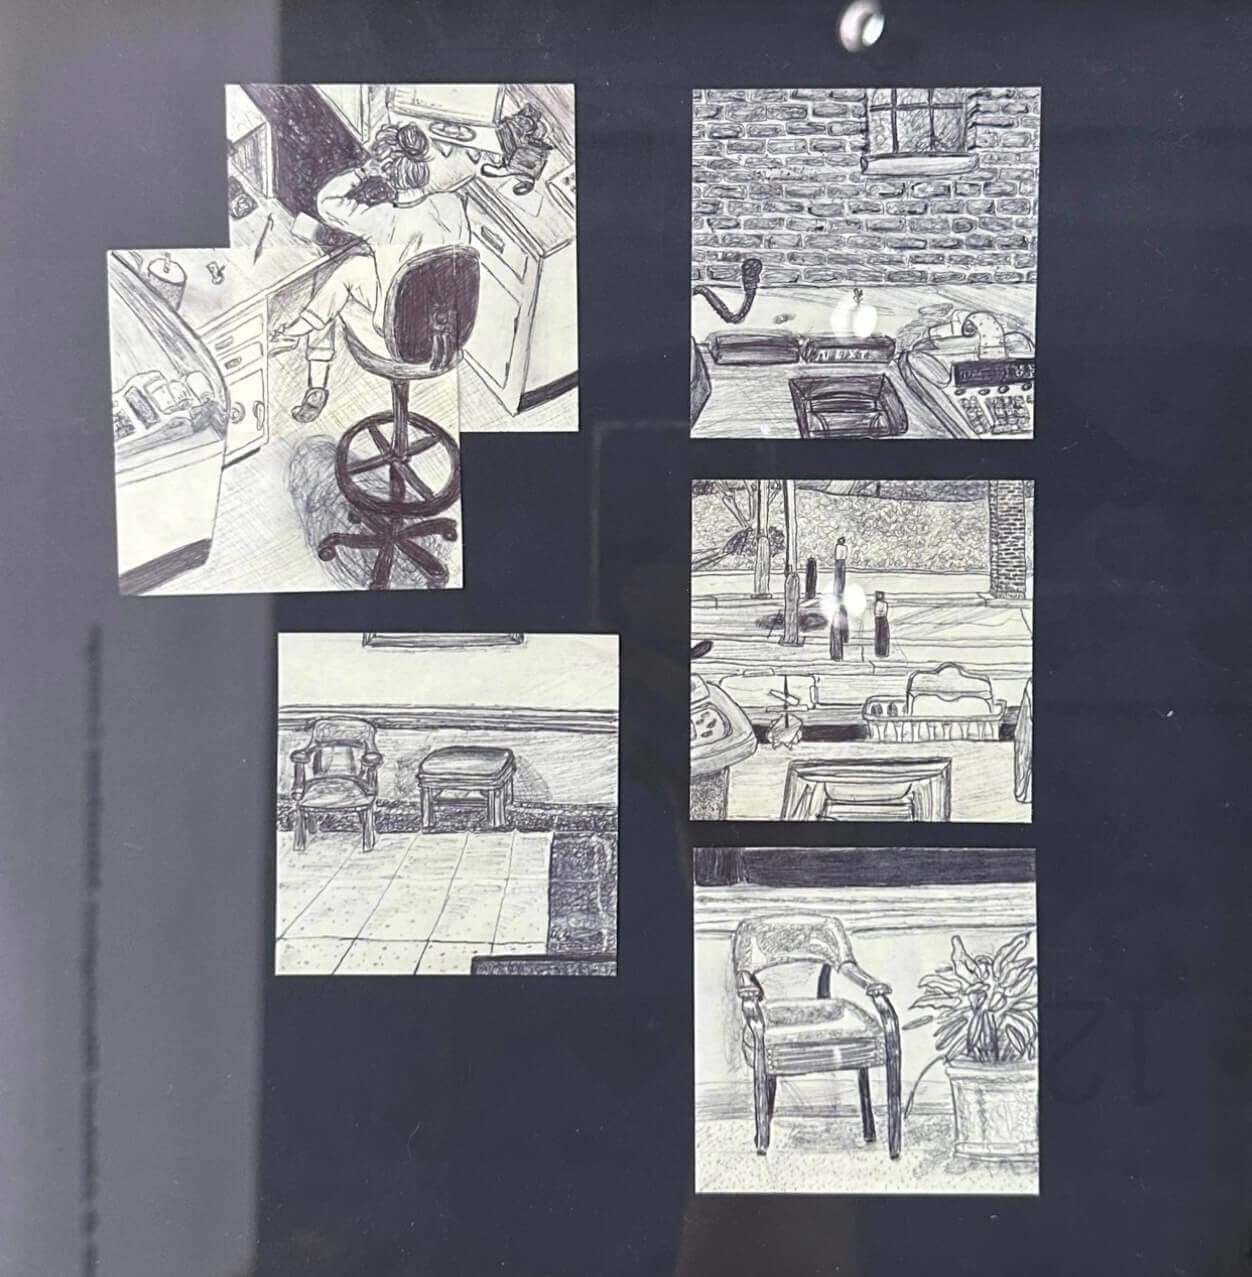 Sticky note doodles showing parts of an office